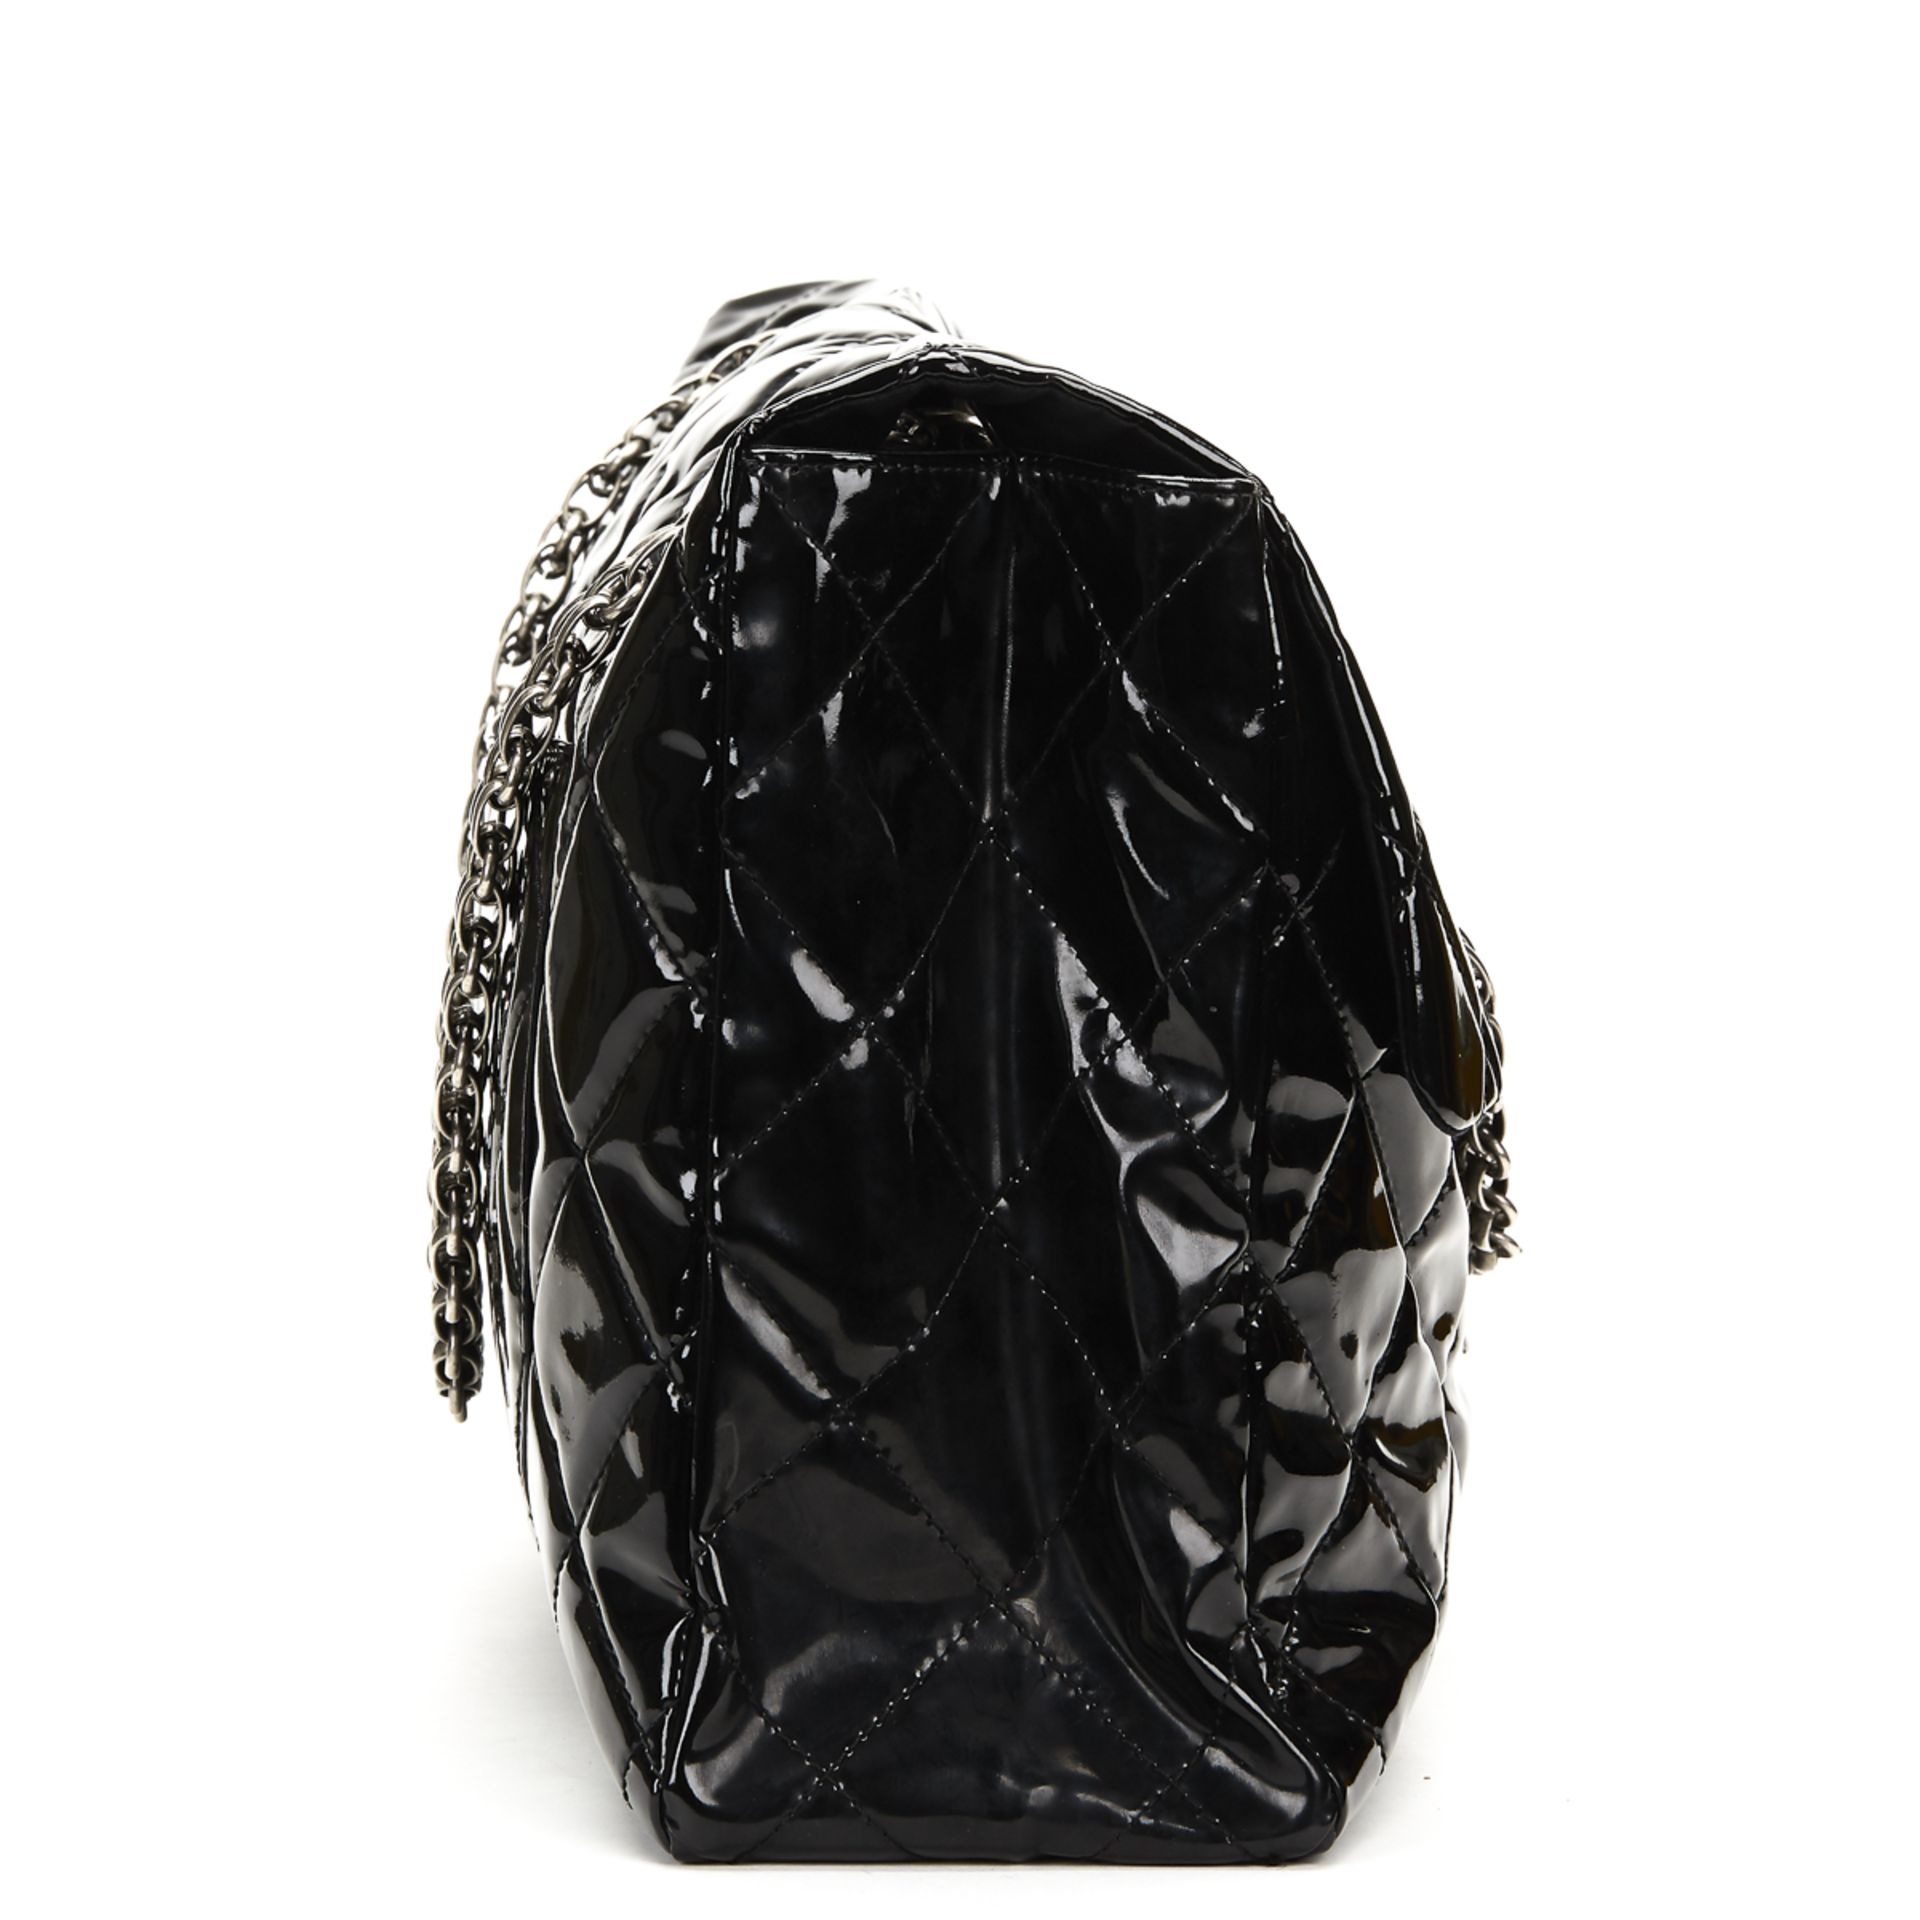 CHANEL Super Maxi 2.55 Reissue Flap Bag , - Black Quilted Patent Leather Super Maxi 2.55 Reissue - Image 2 of 9